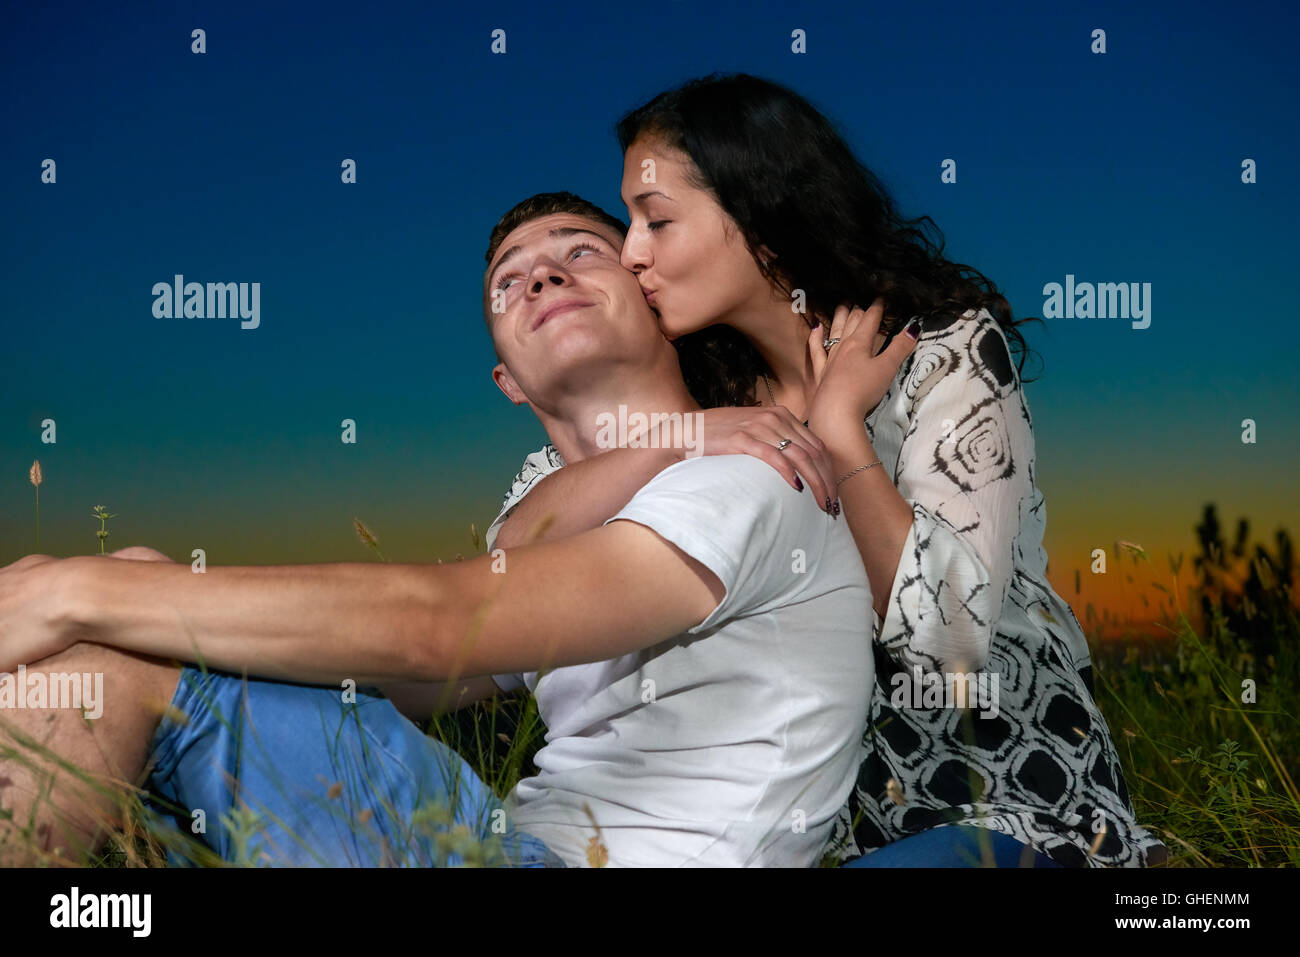 young romantic couple sit on grass and ebmbrace on country outdoor, dark night sky, love concept, adult people Stock Photo